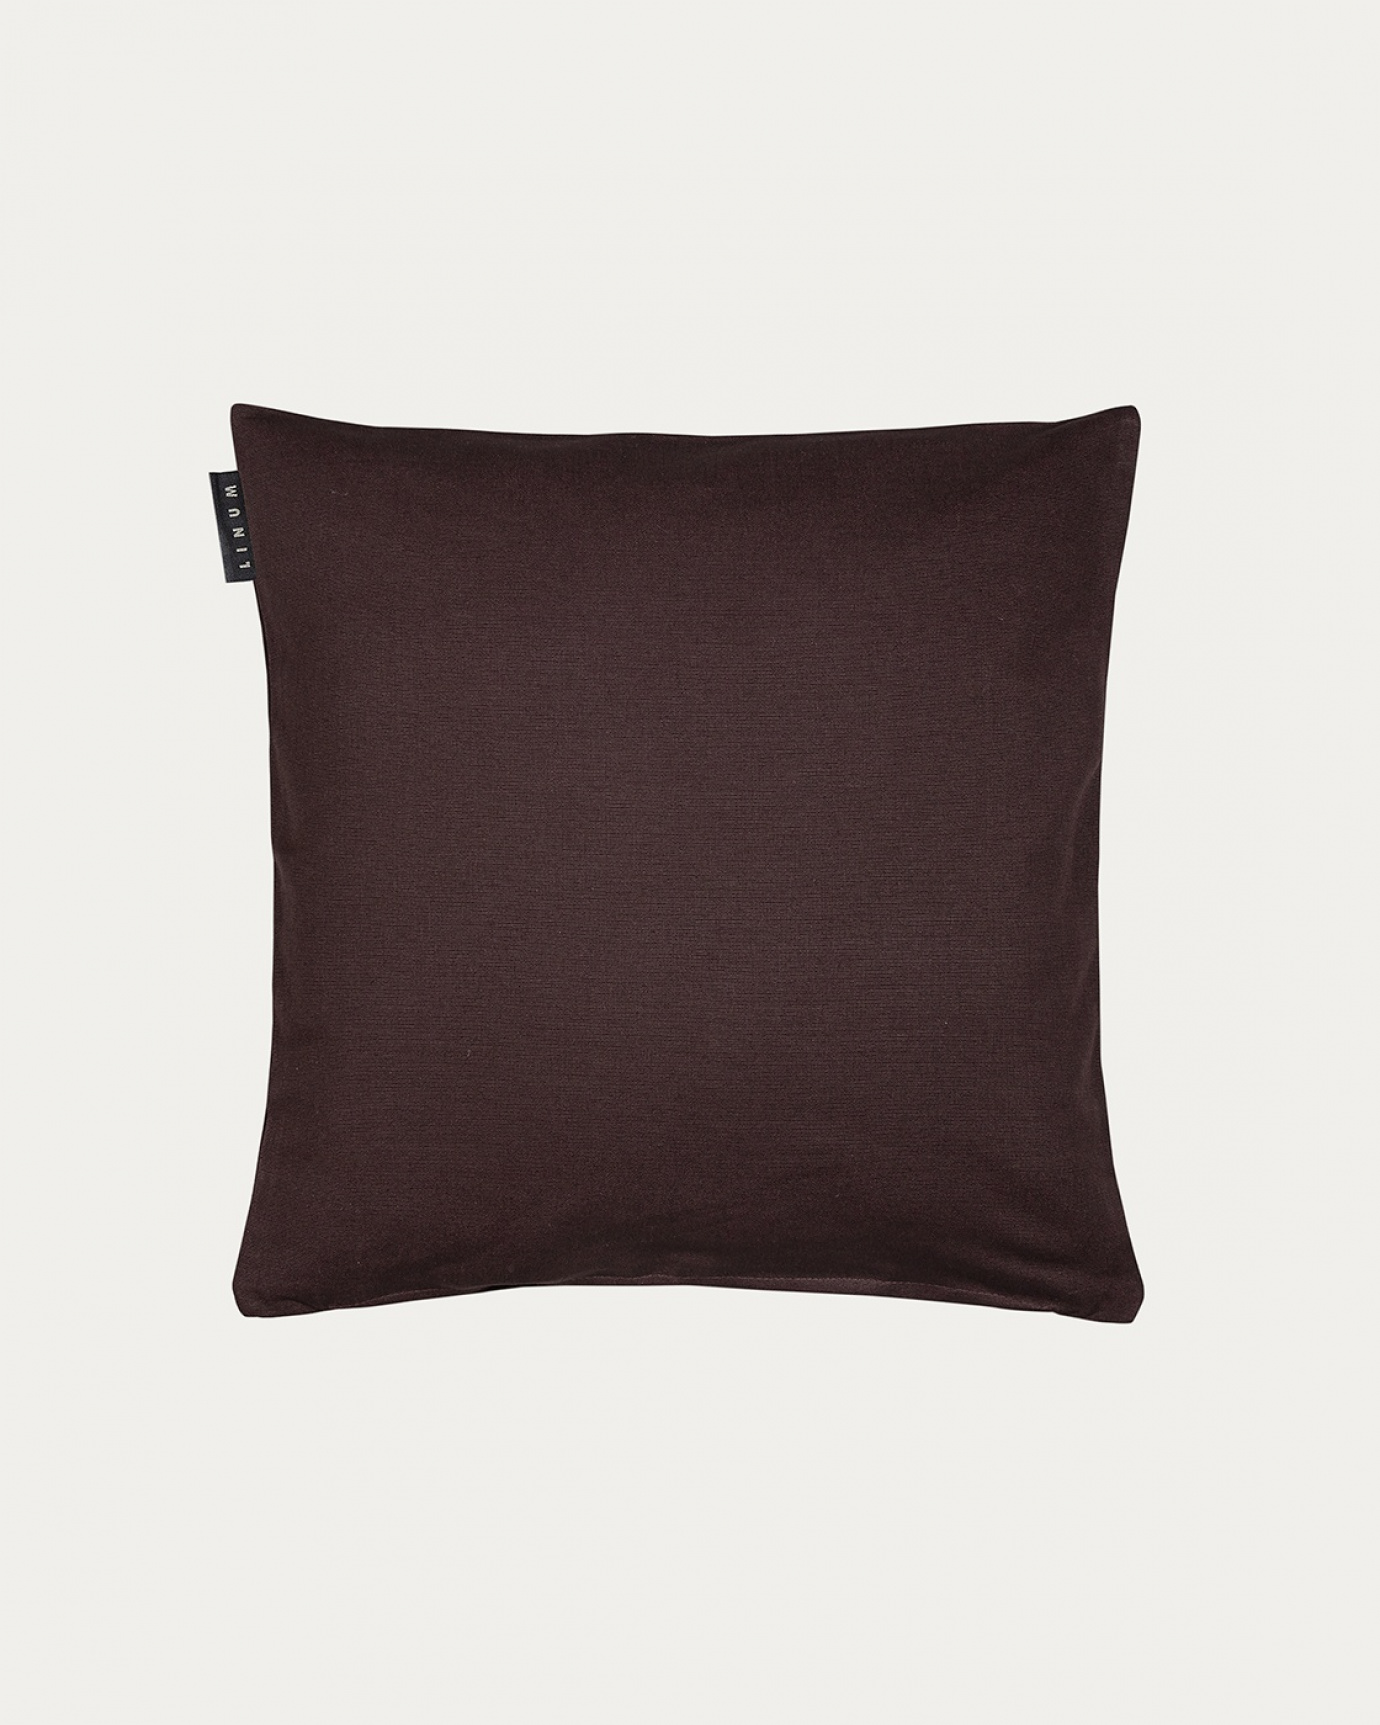 Product image dark brown ANNABELL cushion cover made of soft cotton from LINUM DESIGN. Size 40x40 cm.